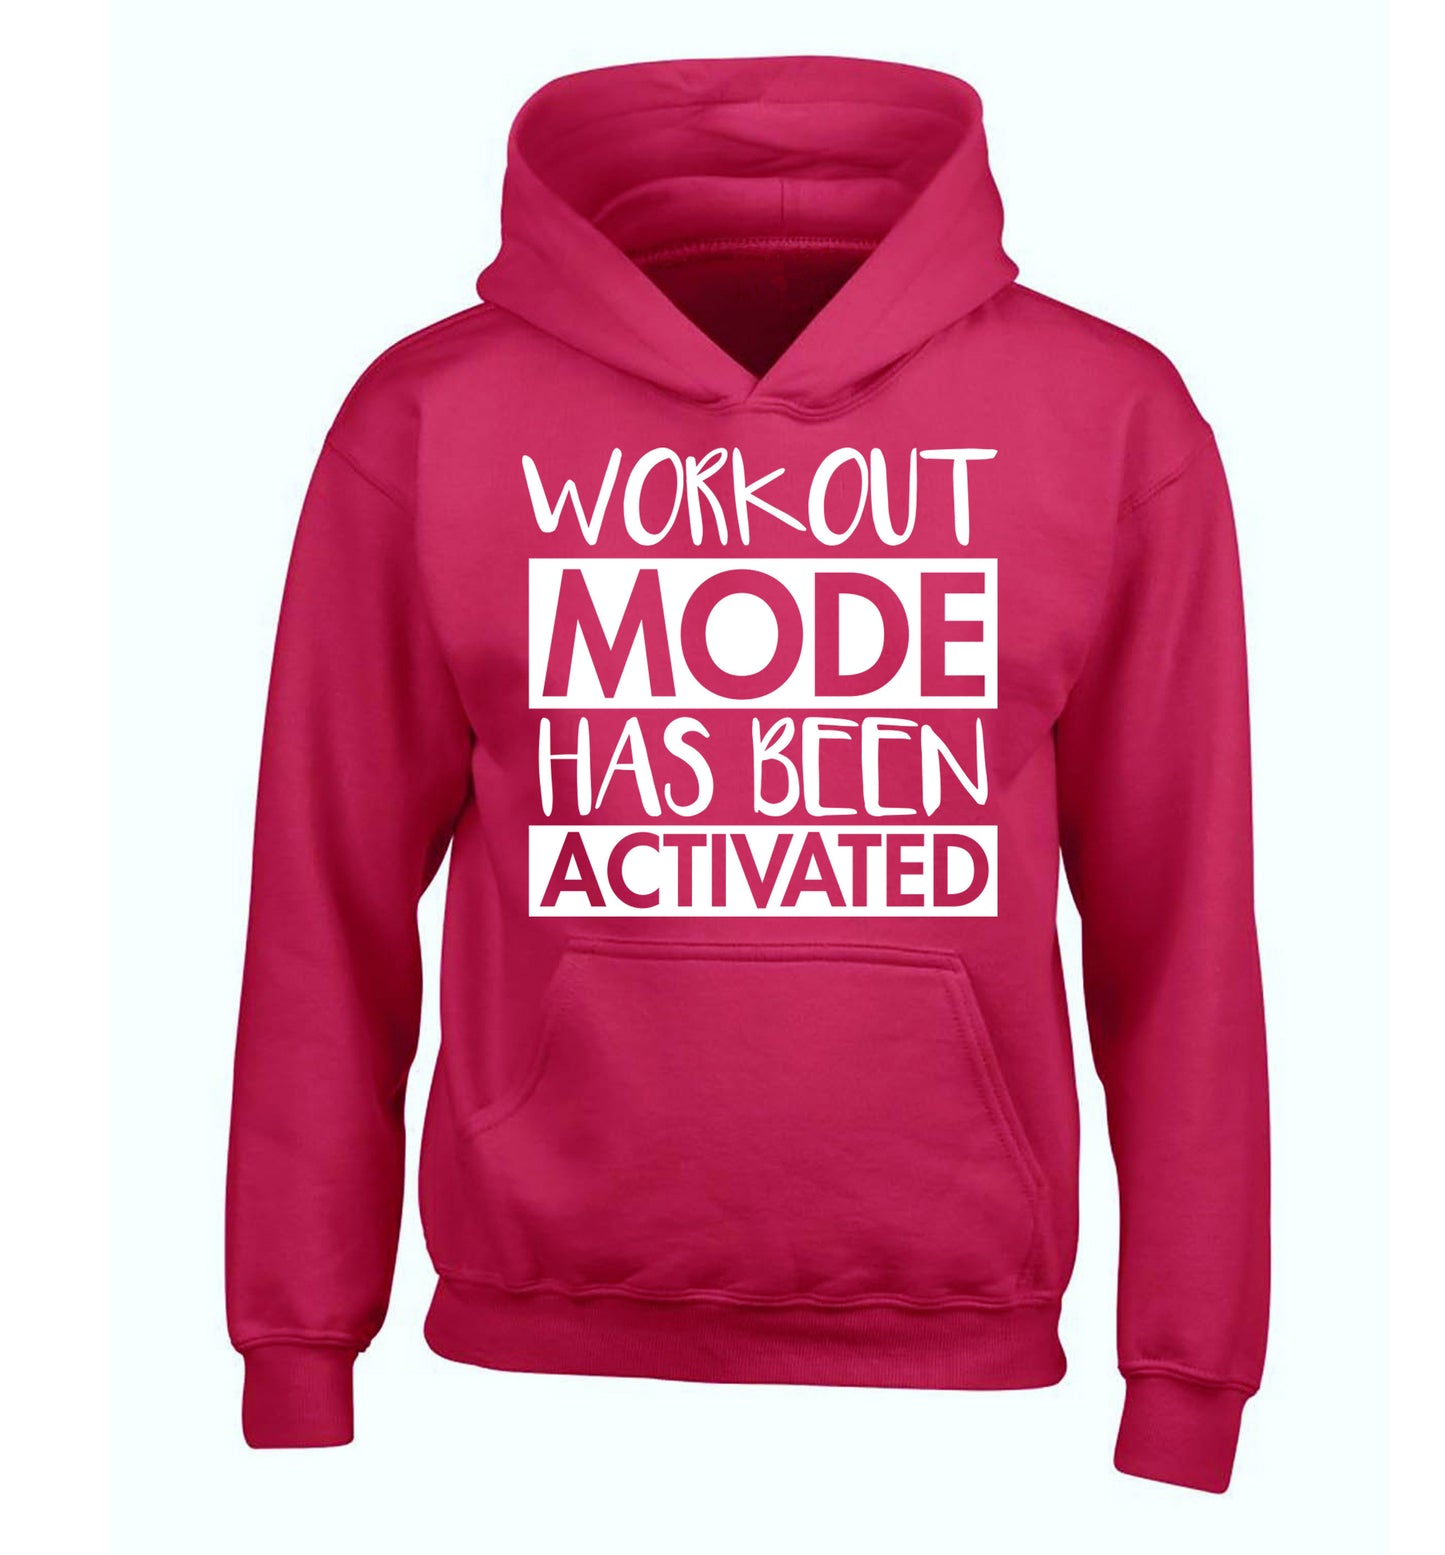 Workout mode has been activated children's pink hoodie 12-14 Years